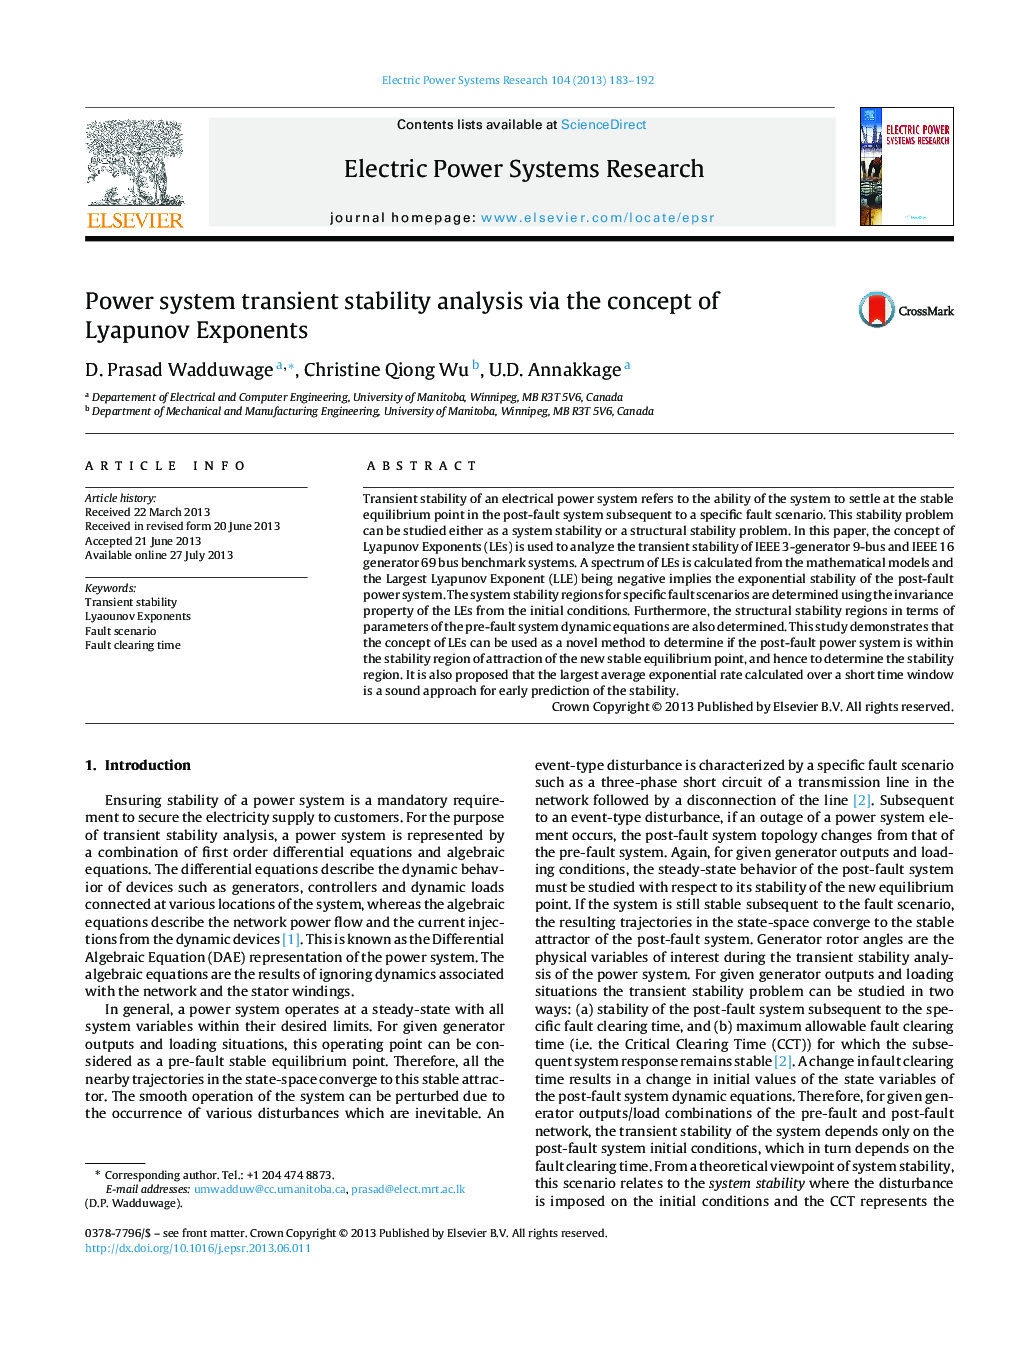 Power system transient stability analysis via the concept of Lyapunov Exponents